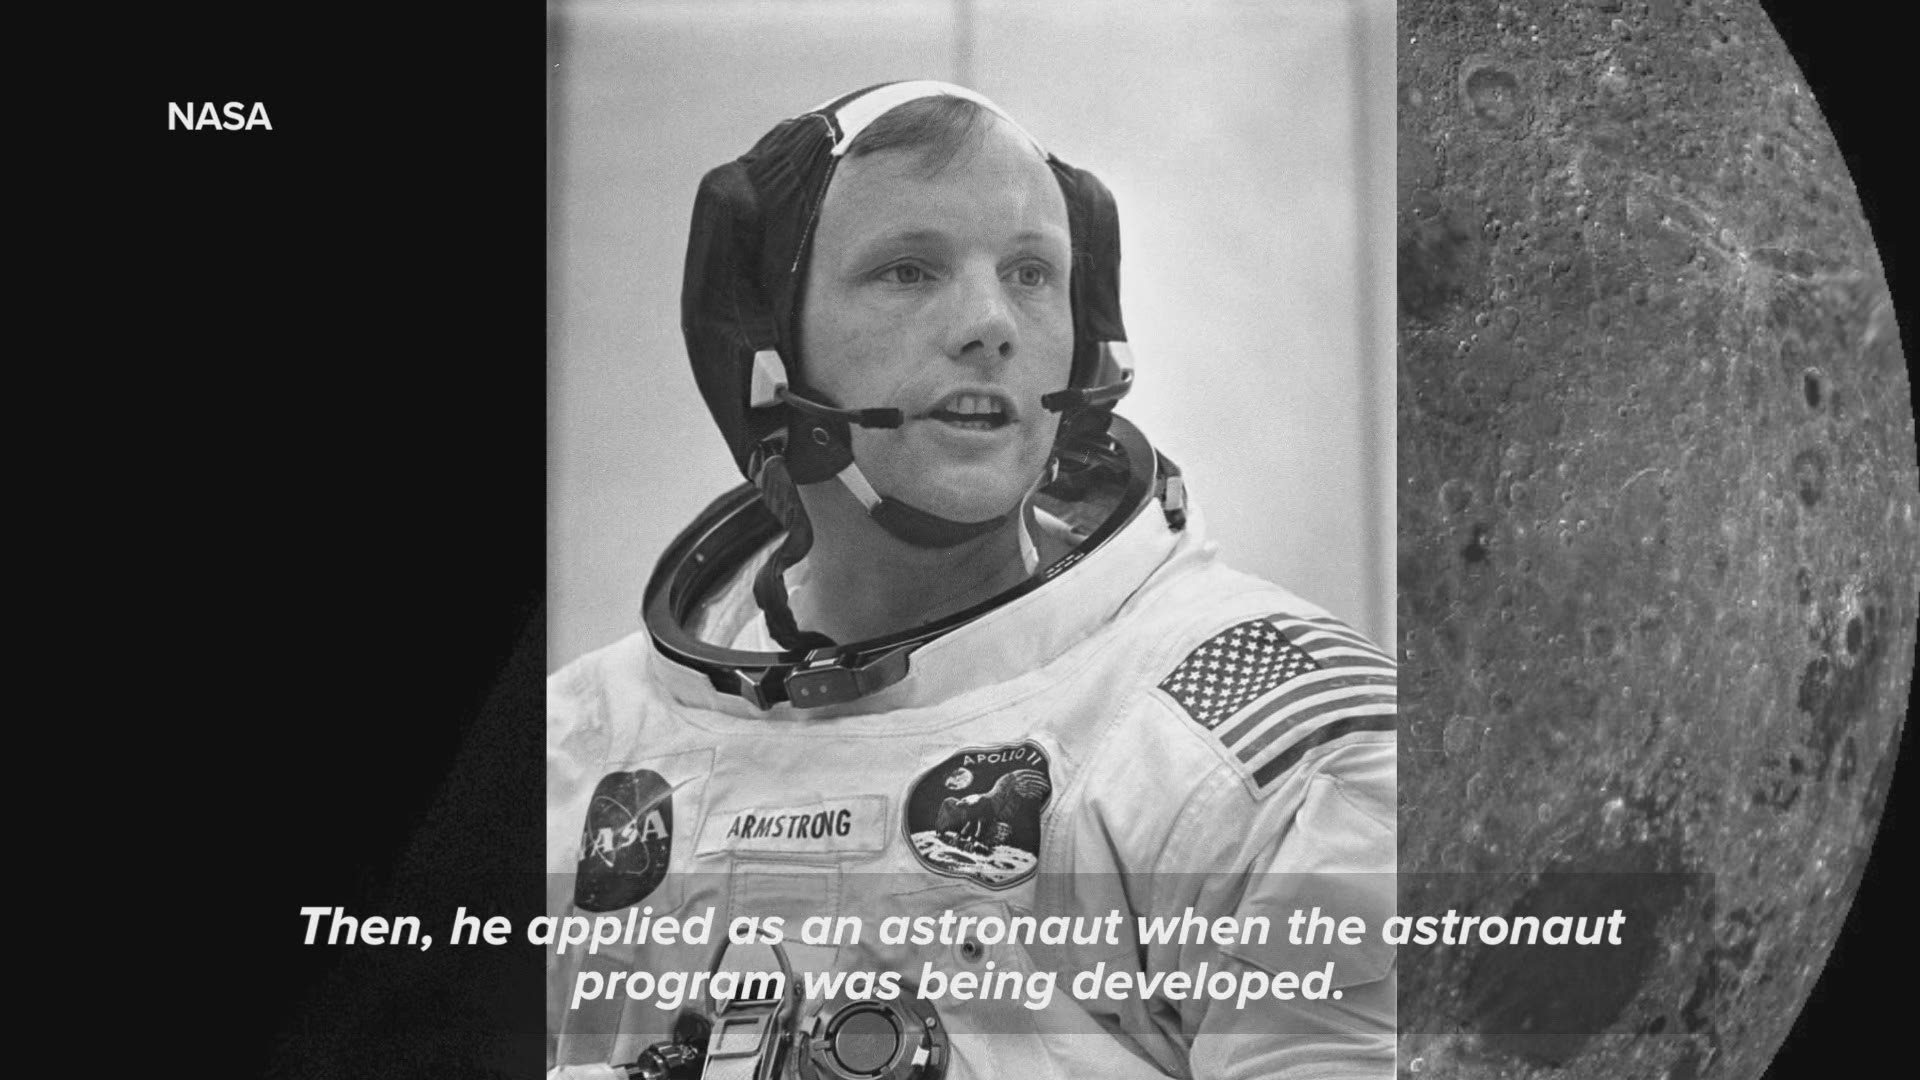 As we celebrate the 50th anniversary of the Apollo 11 moon landing, here's a look back at how Neil Armstrong was recruited to work in Cleveland. This story is through the eyes of Dr. Robert Graham, the man who recruited Armstrong for the job.